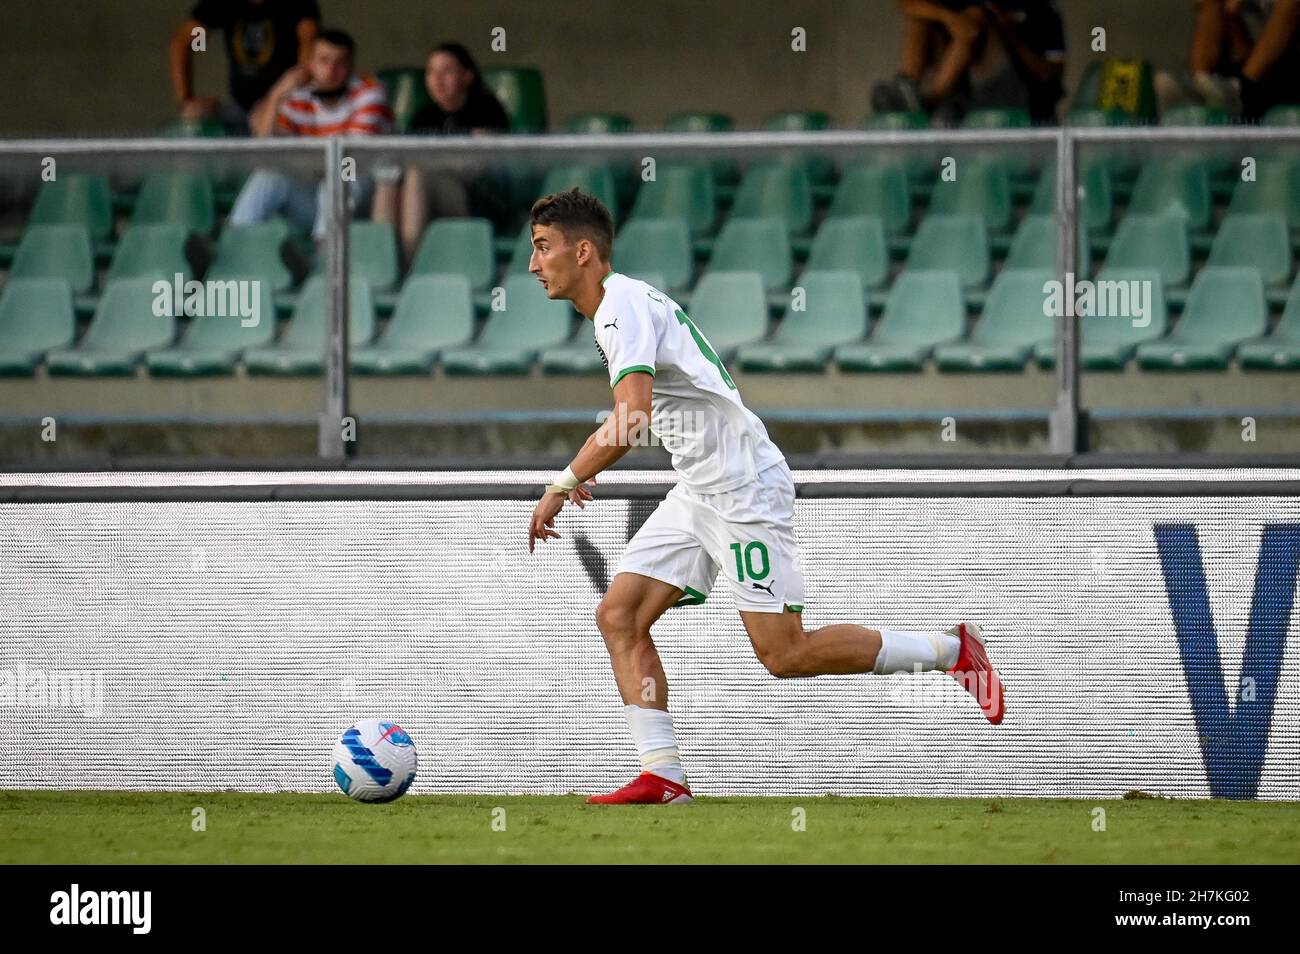 Verona, Italy. 21st Aug, 2021. Filip Djuricic (Sassuolo) portrait in action during Hellas Verona FC vs US Sassuolo (portraits), italian soccer Serie A match in Verona, Italy, August 21 2021 Credit: Independent Photo Agency/Alamy Live News Stock Photo